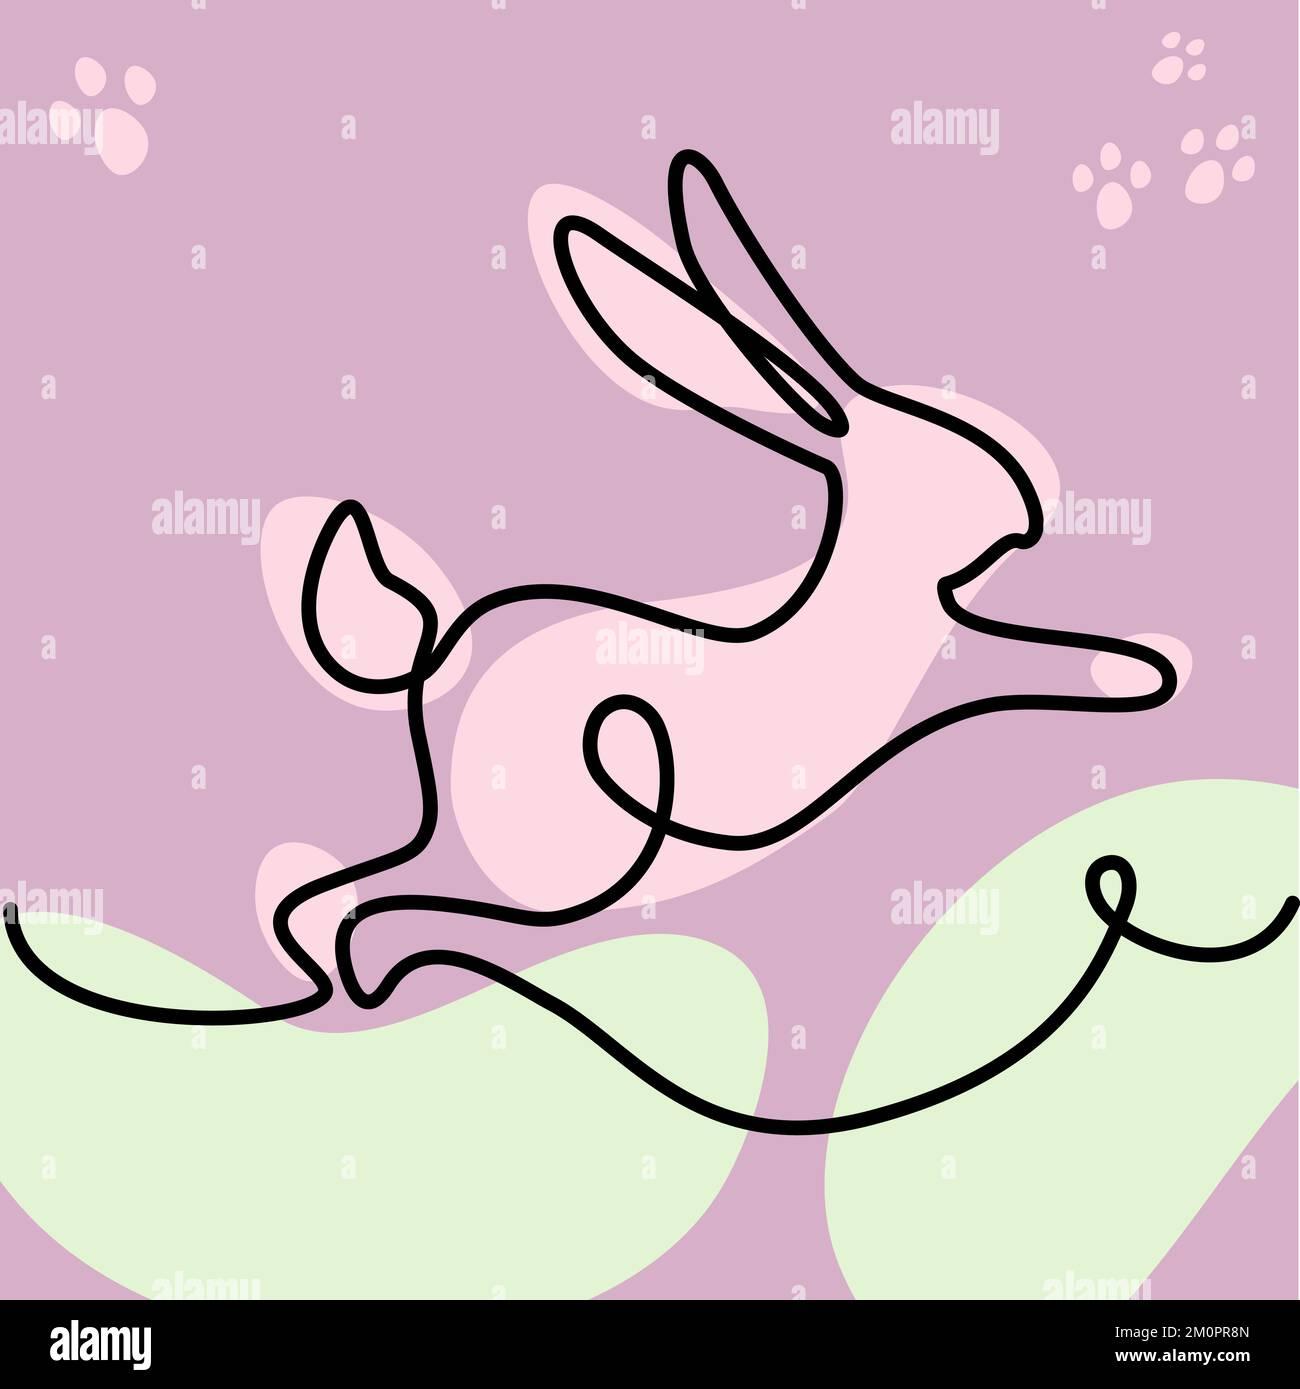 Jumping Bunny As The Symbol Of Year According To Chinese